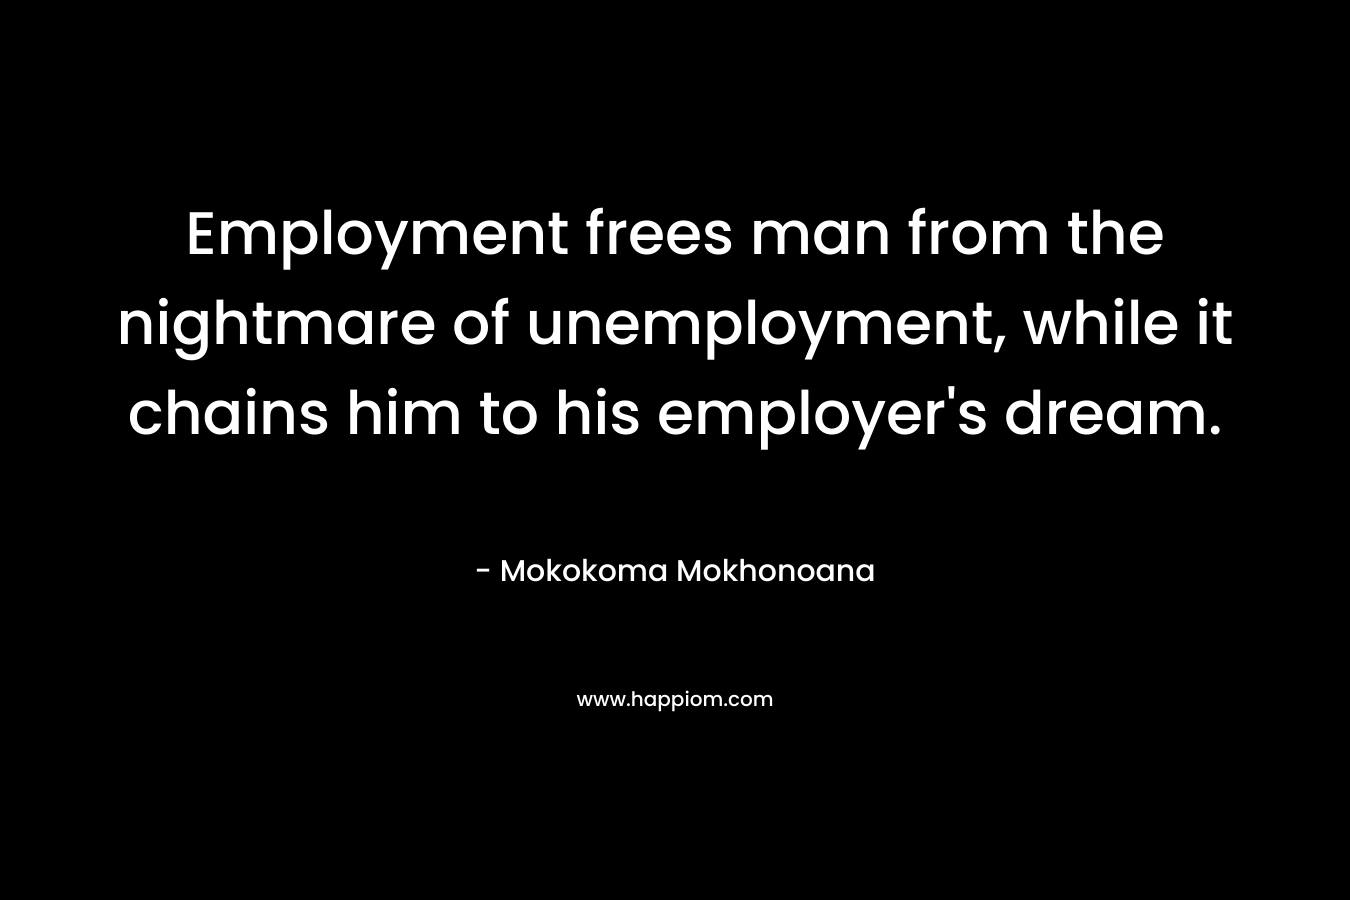 Employment frees man from the nightmare of unemployment, while it chains him to his employer's dream.